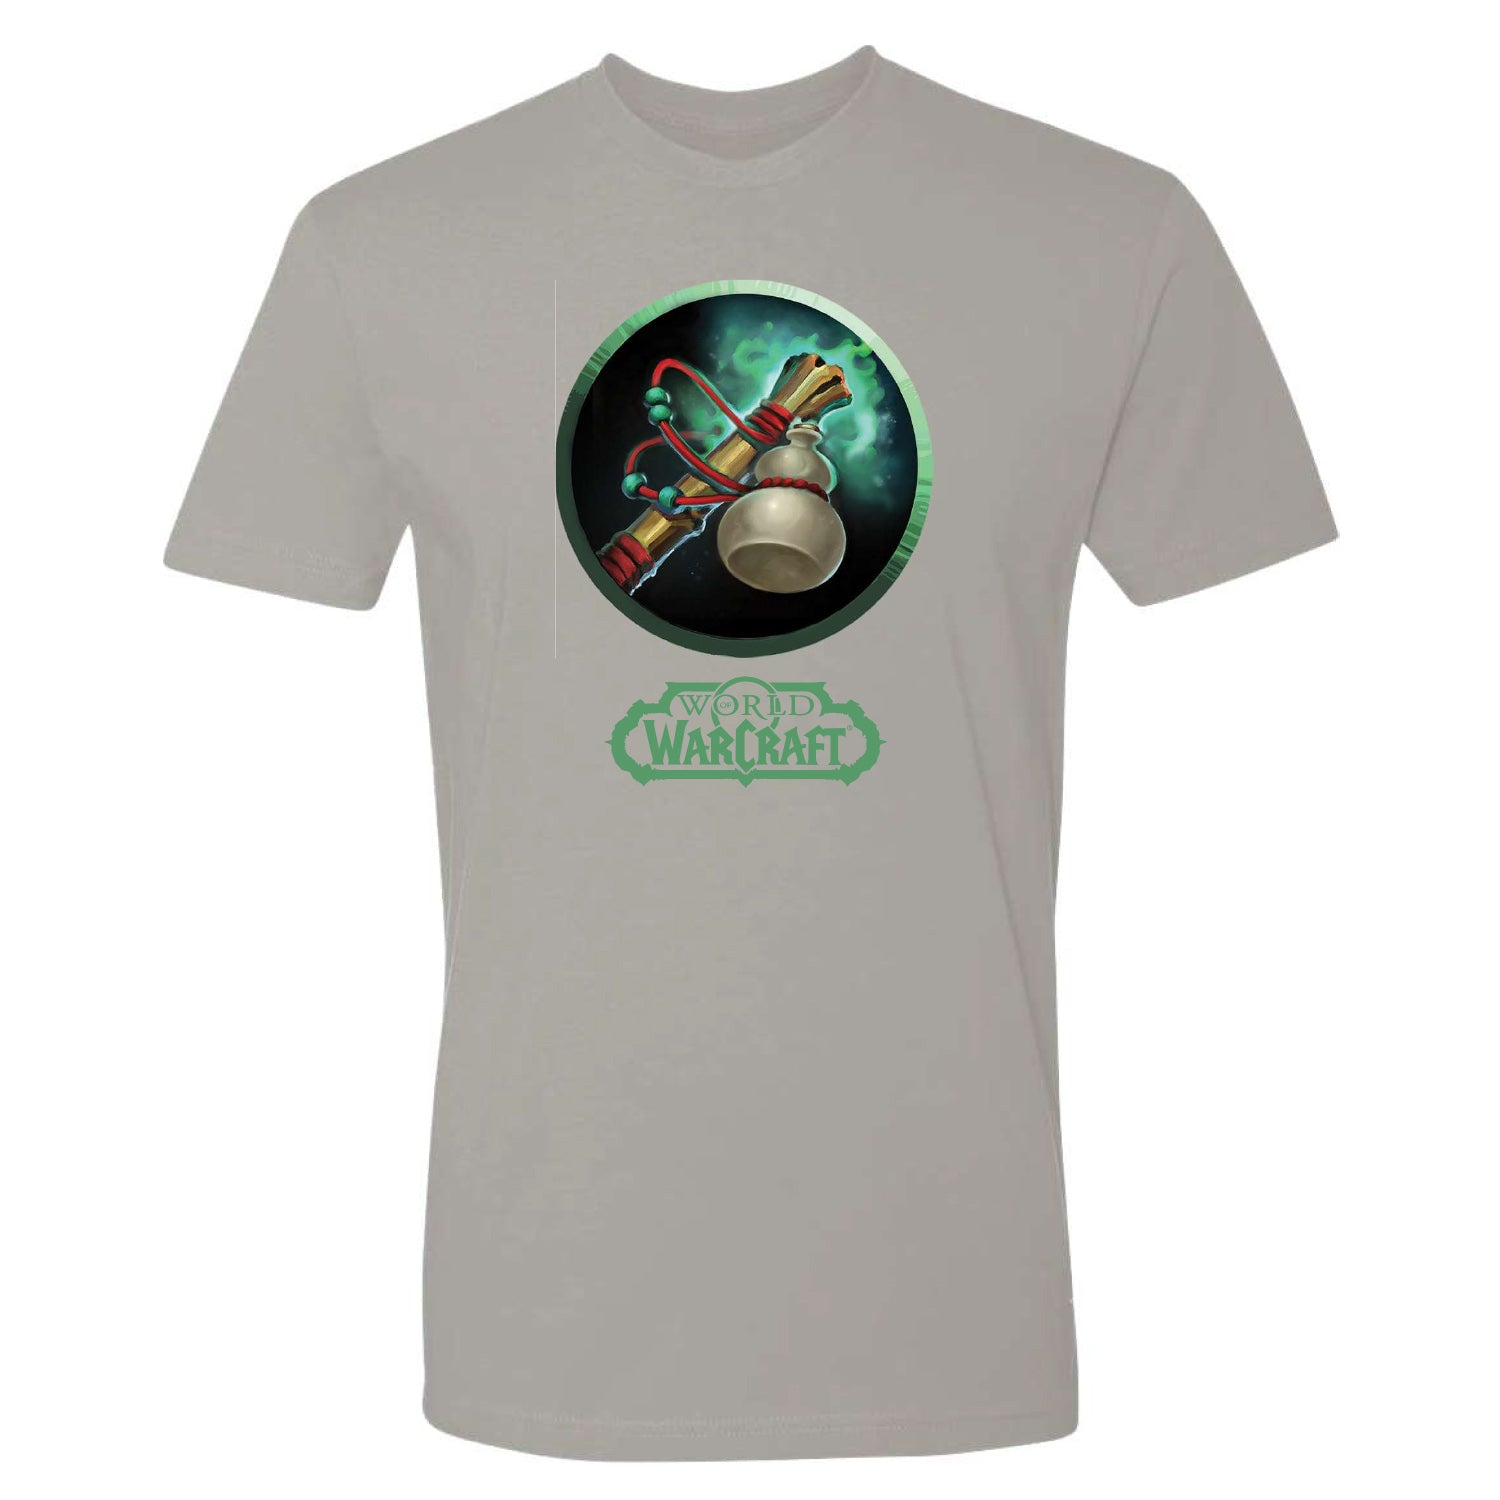 World of Warcraft Monk T-Shirt - Front View Grey Version